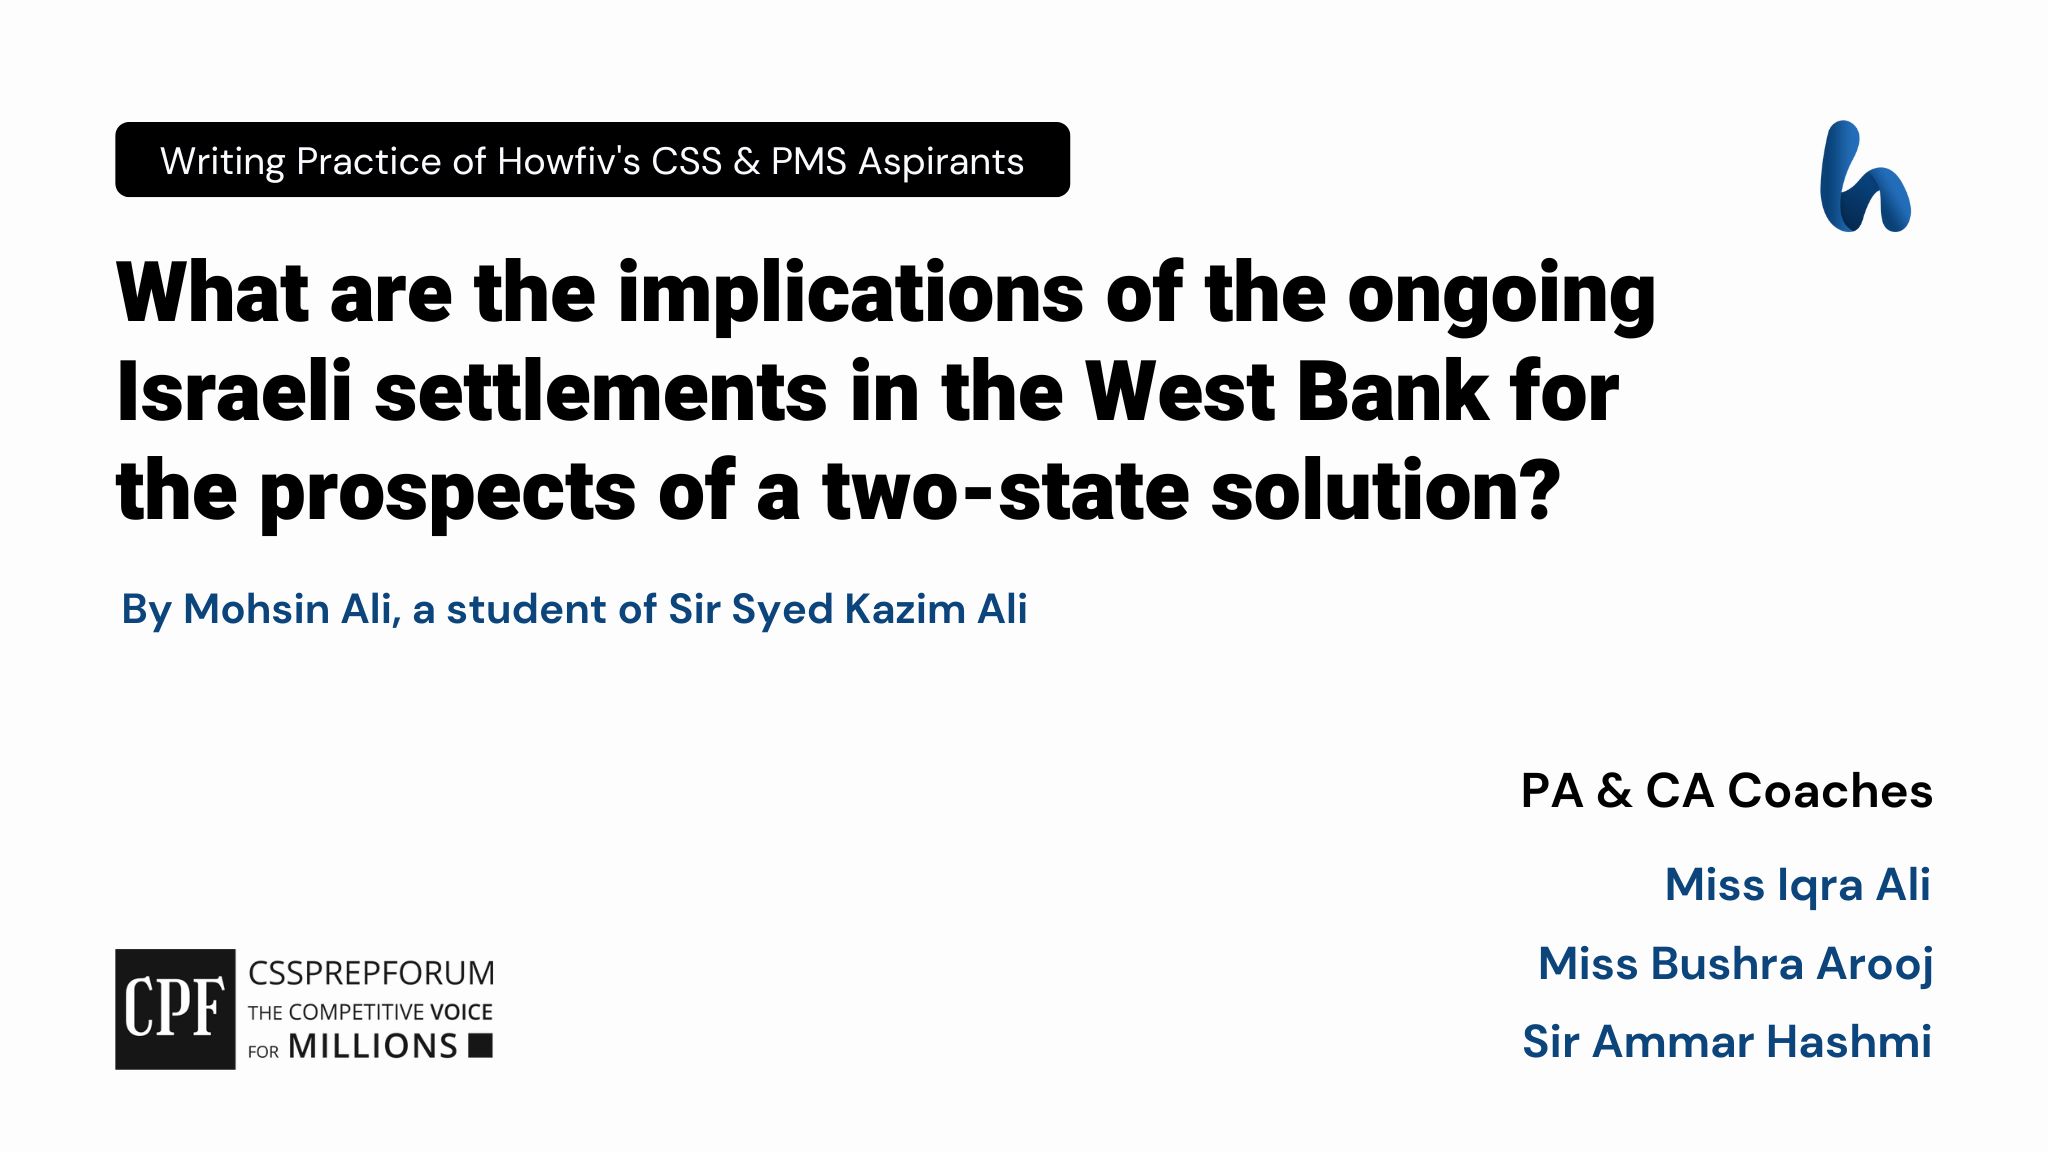 What are the implications of the ongoing Israeli settlements in the West Bank for the prospects of a two-state solution